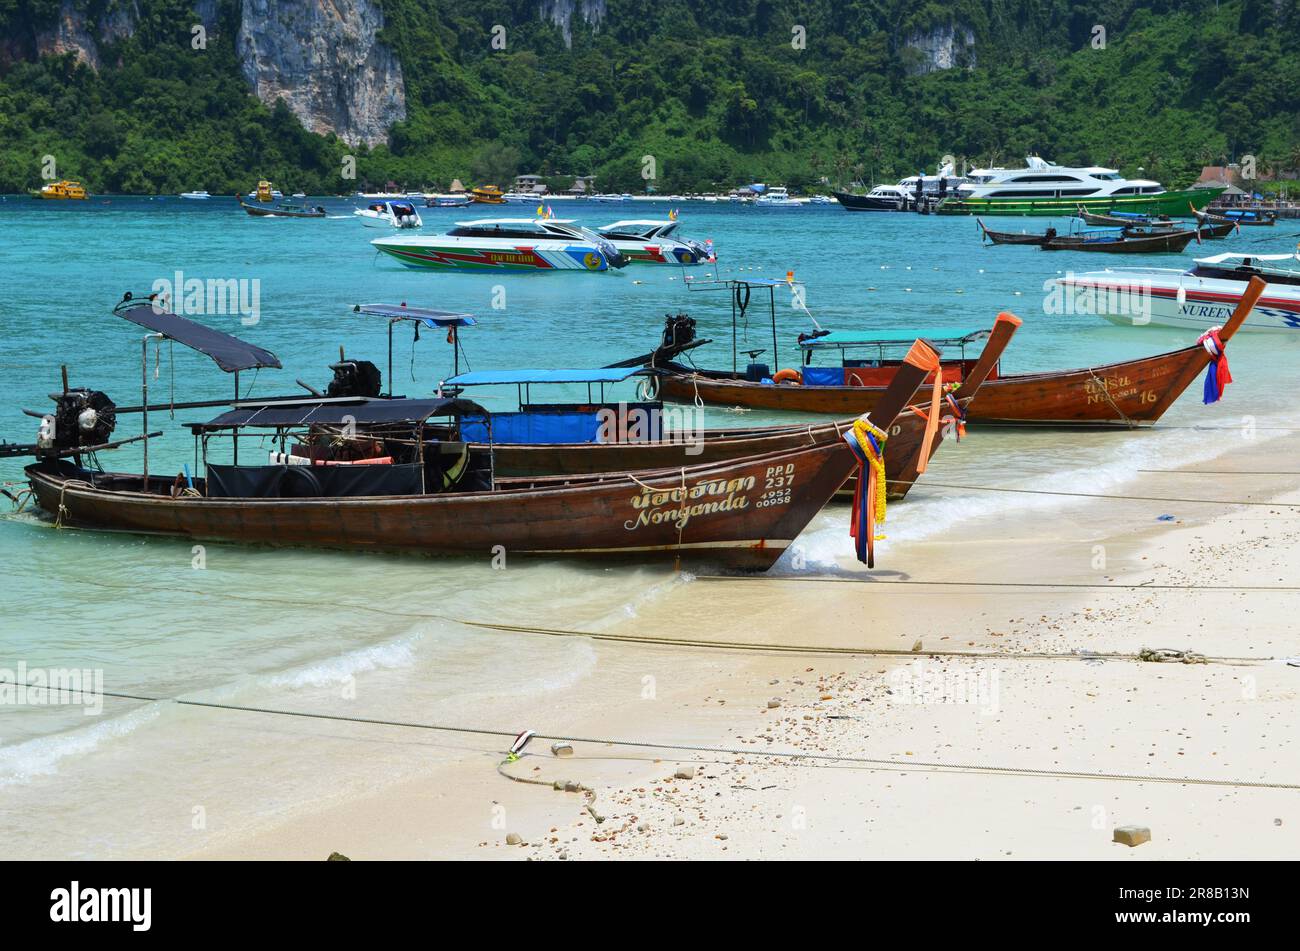 Two long-tail fishing boats on the beach of Phi Phi Island in Thailand, with sailing boats in the background. Stock Photo